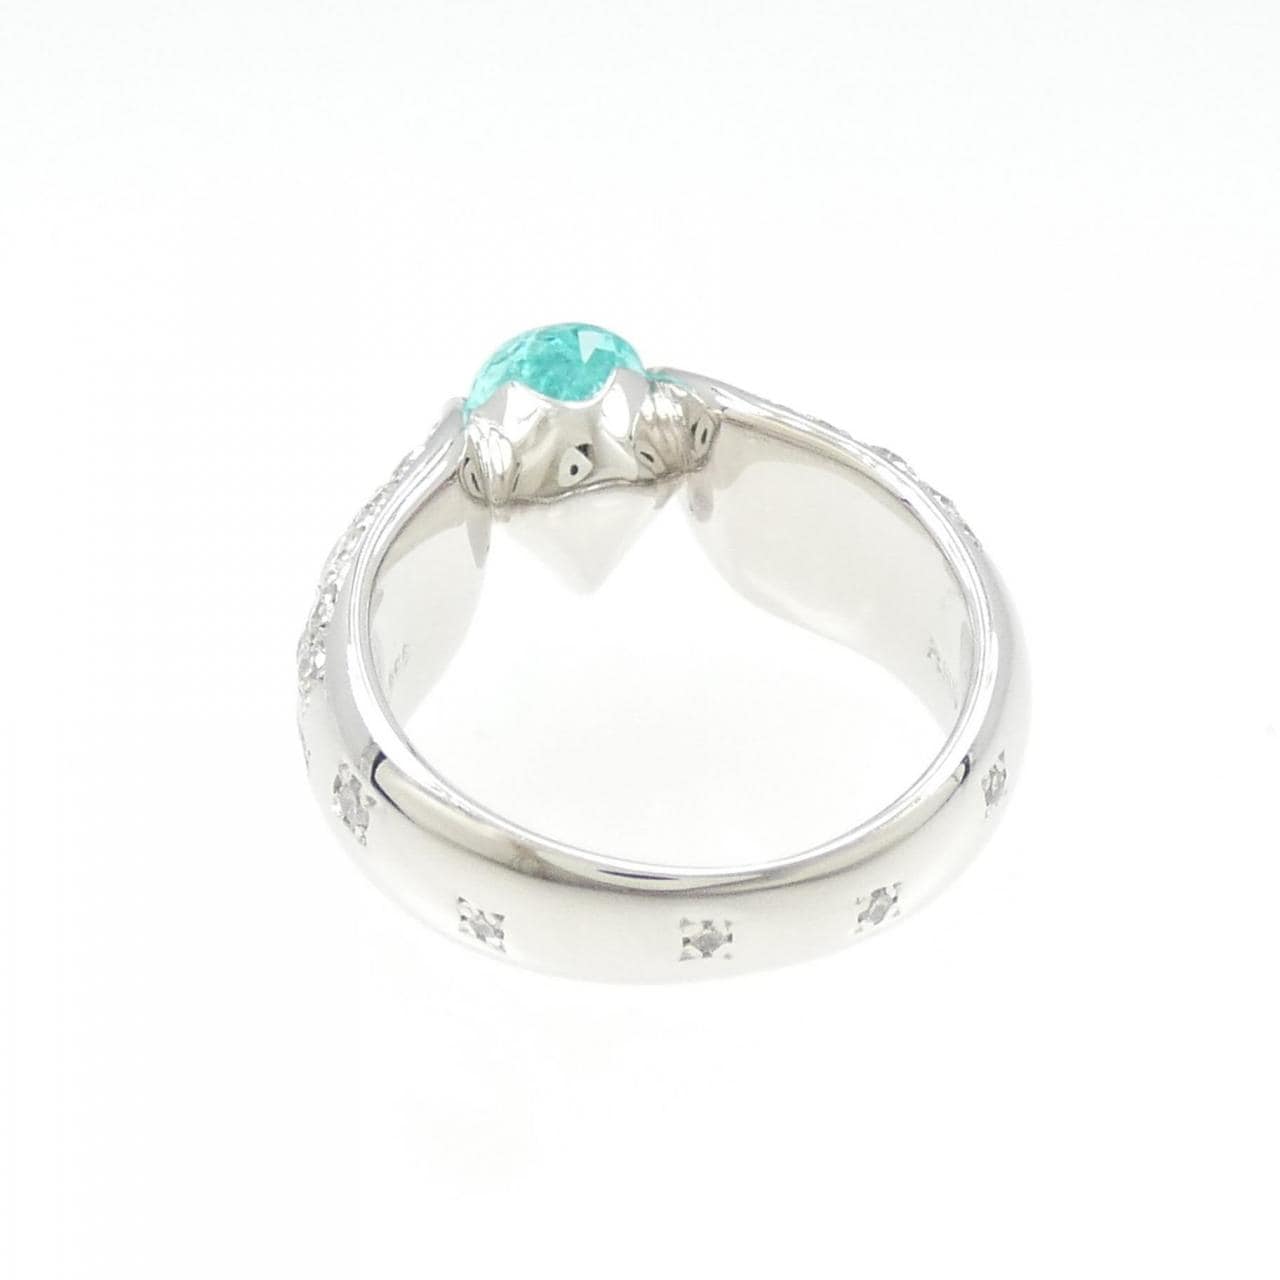 PT Paraiba Tourmaline Ring 1.71CT Made in Mozambique